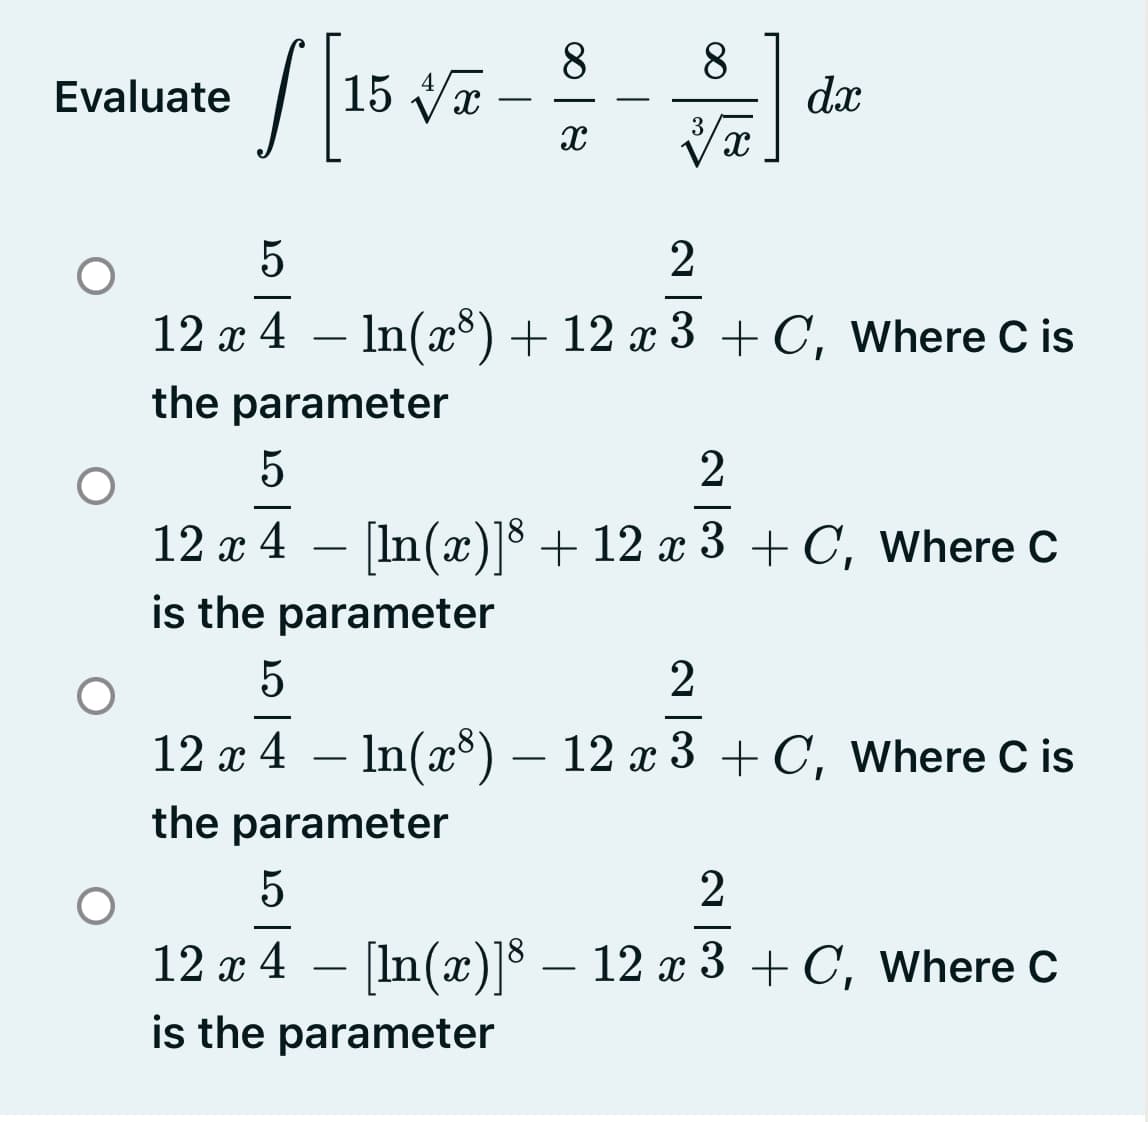 / 15 Va
8
8
dx
Evaluate
3
5
2
-
12 x 4 – In(x) + 12 x 3 + C, Where C is
the parameter
5
2
12 x 4 – [In(x)]³ + 12 x 3 + C, Where C
is the parameter
-
2
-
12 х 4 — In(x) — 12 х3 +С, Where C is
-
the parameter
5
2
-
12 x 4 – [In(x)]$ – 12 x 3 + C, Where C
is the parameter
-
-
